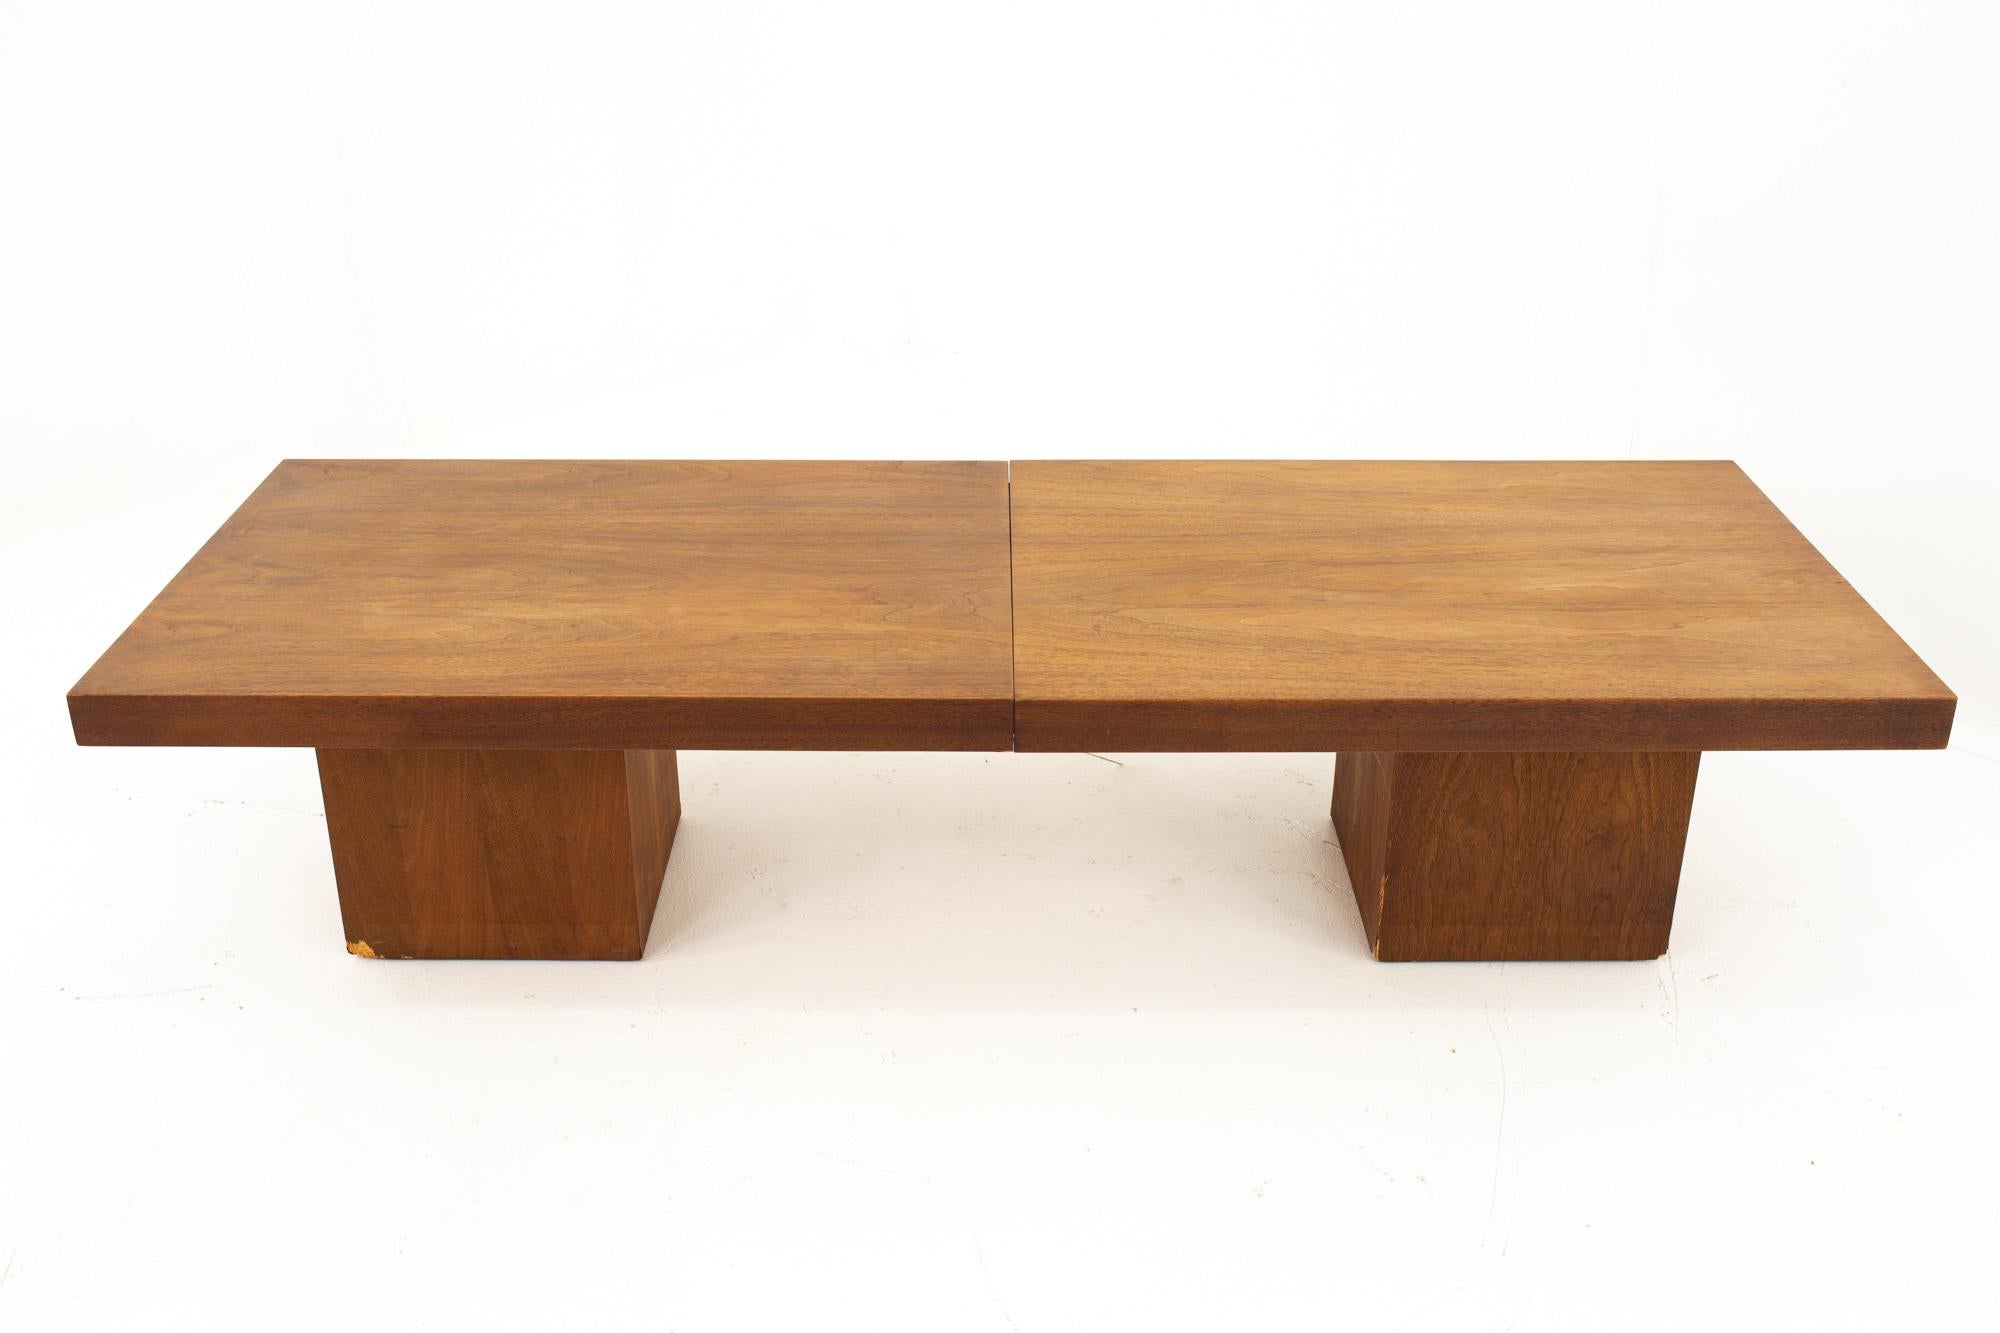 John Keal for Brown Saltman mid century expanding coffee table

Table measures: 66.25 wide x 24 deep x 15.25 high 

When expanded table measures: 99.5 wide x 24 deep x 15.25 high

All pieces of furniture can be had in what we call restored